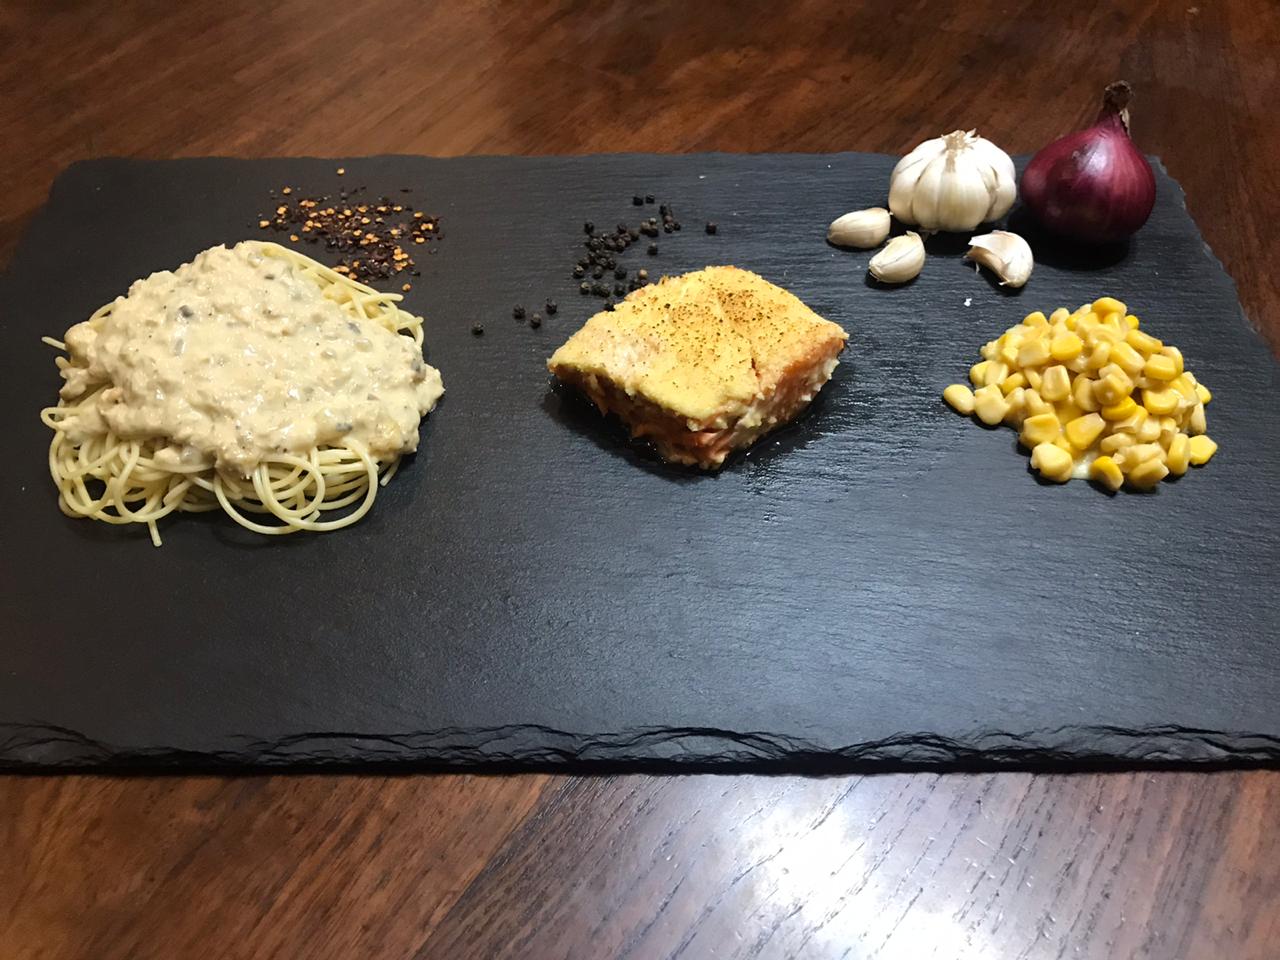 Lenten Special composed of baked salmon, crabmeat pasta and creamed corn.